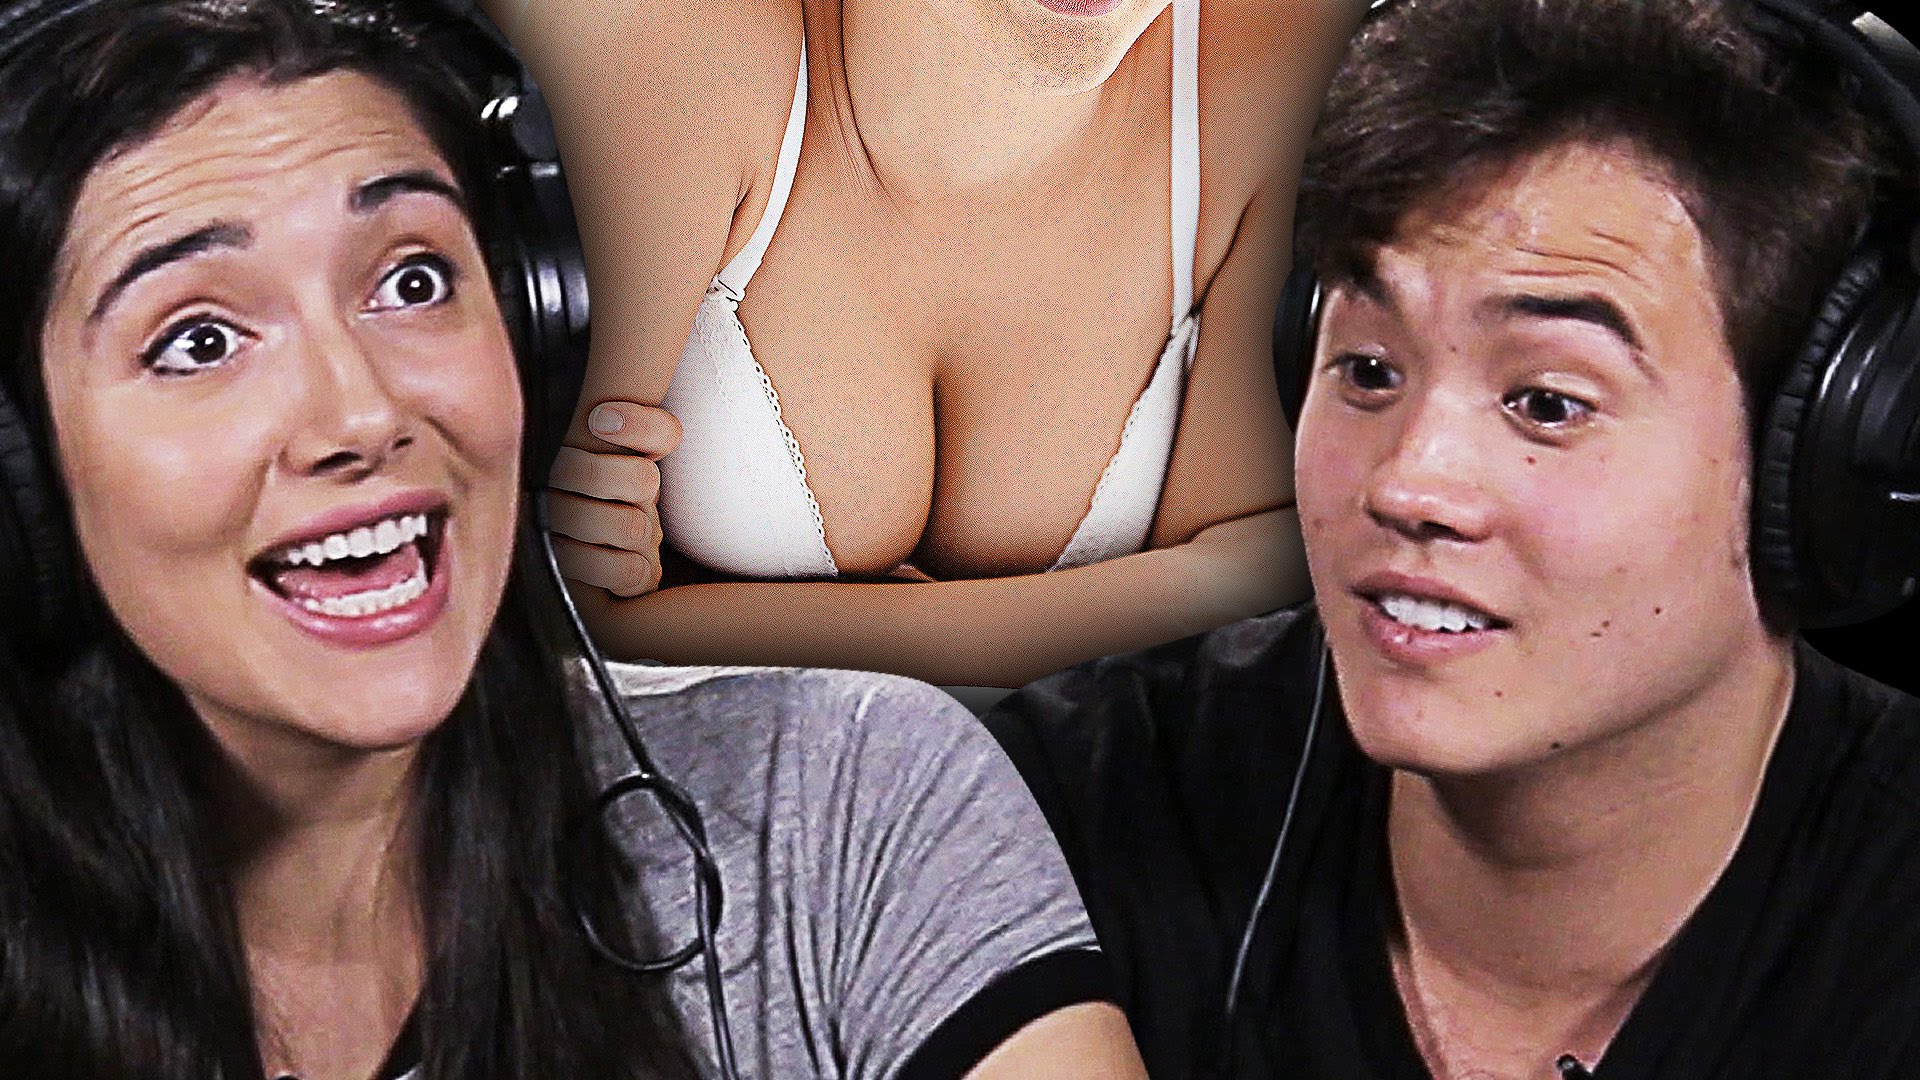 BuzzFeed Video - Couples Watch Hardcore Porn Together